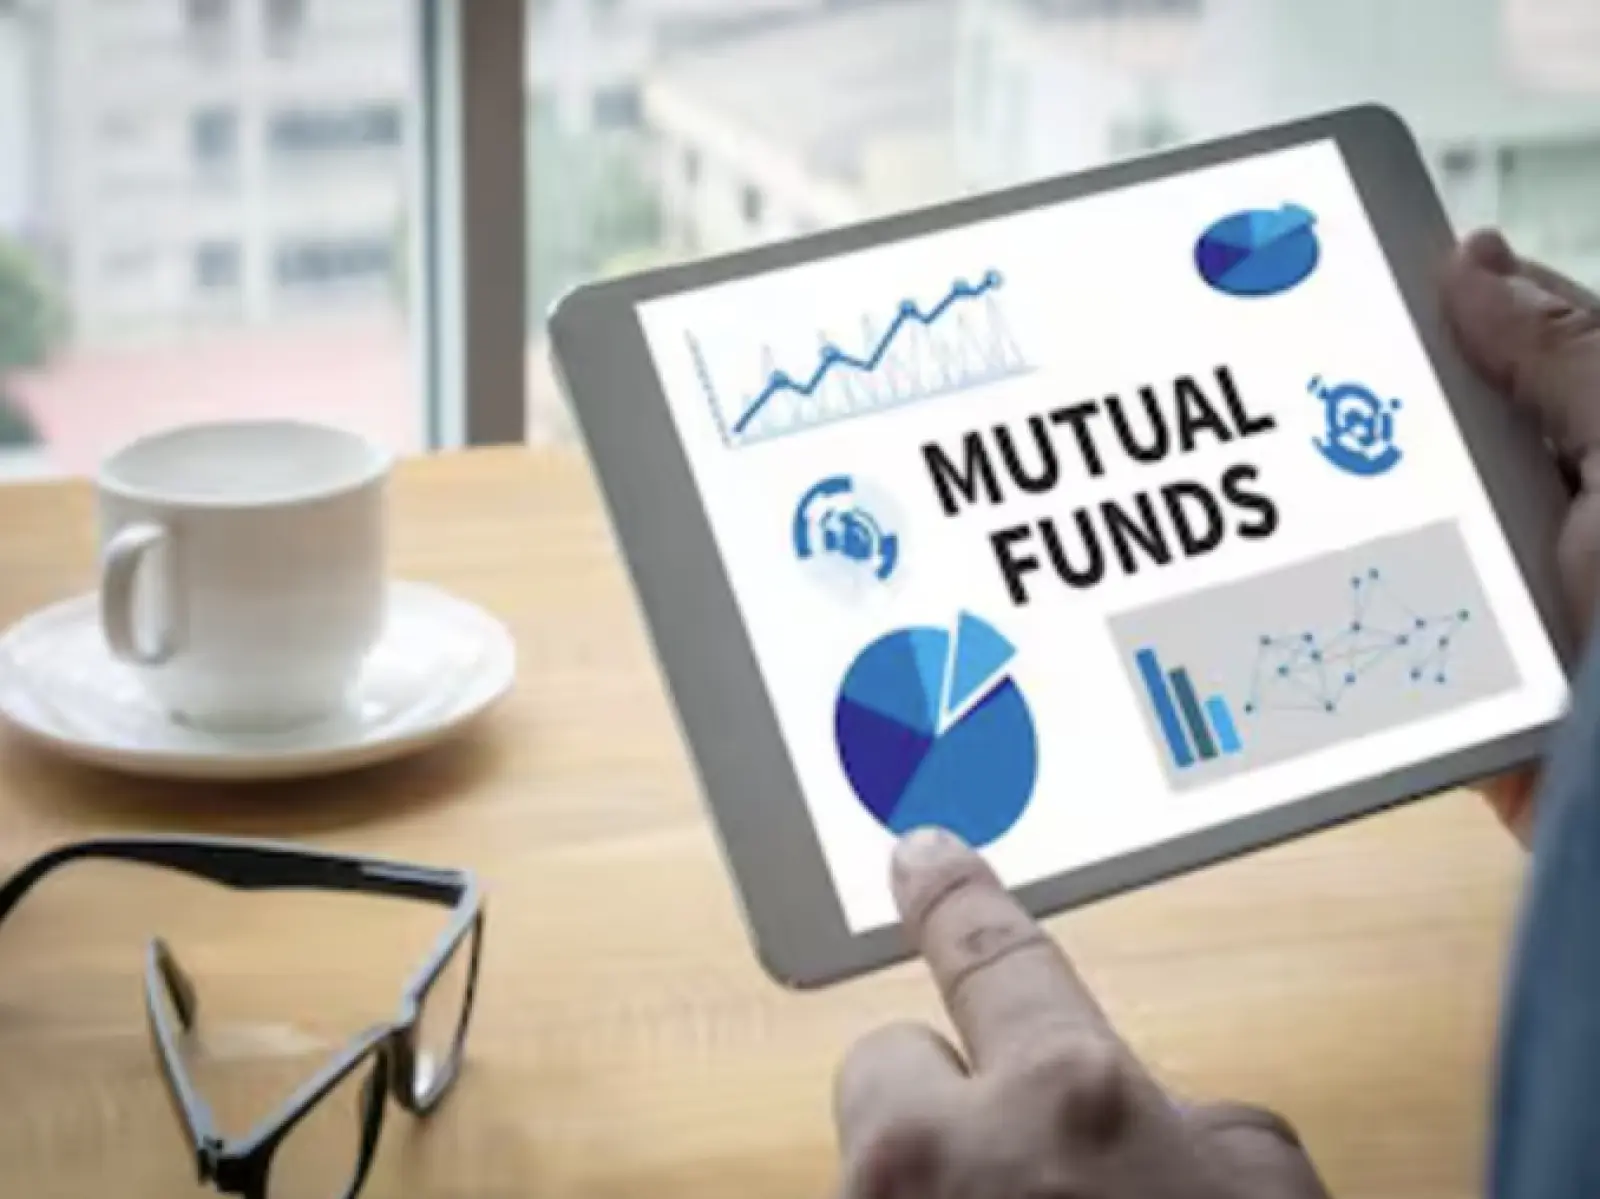 Mutual funds bought Kotak-HDFC shares worth Rs 10 thousand crores, FIIs sold HDFC shares